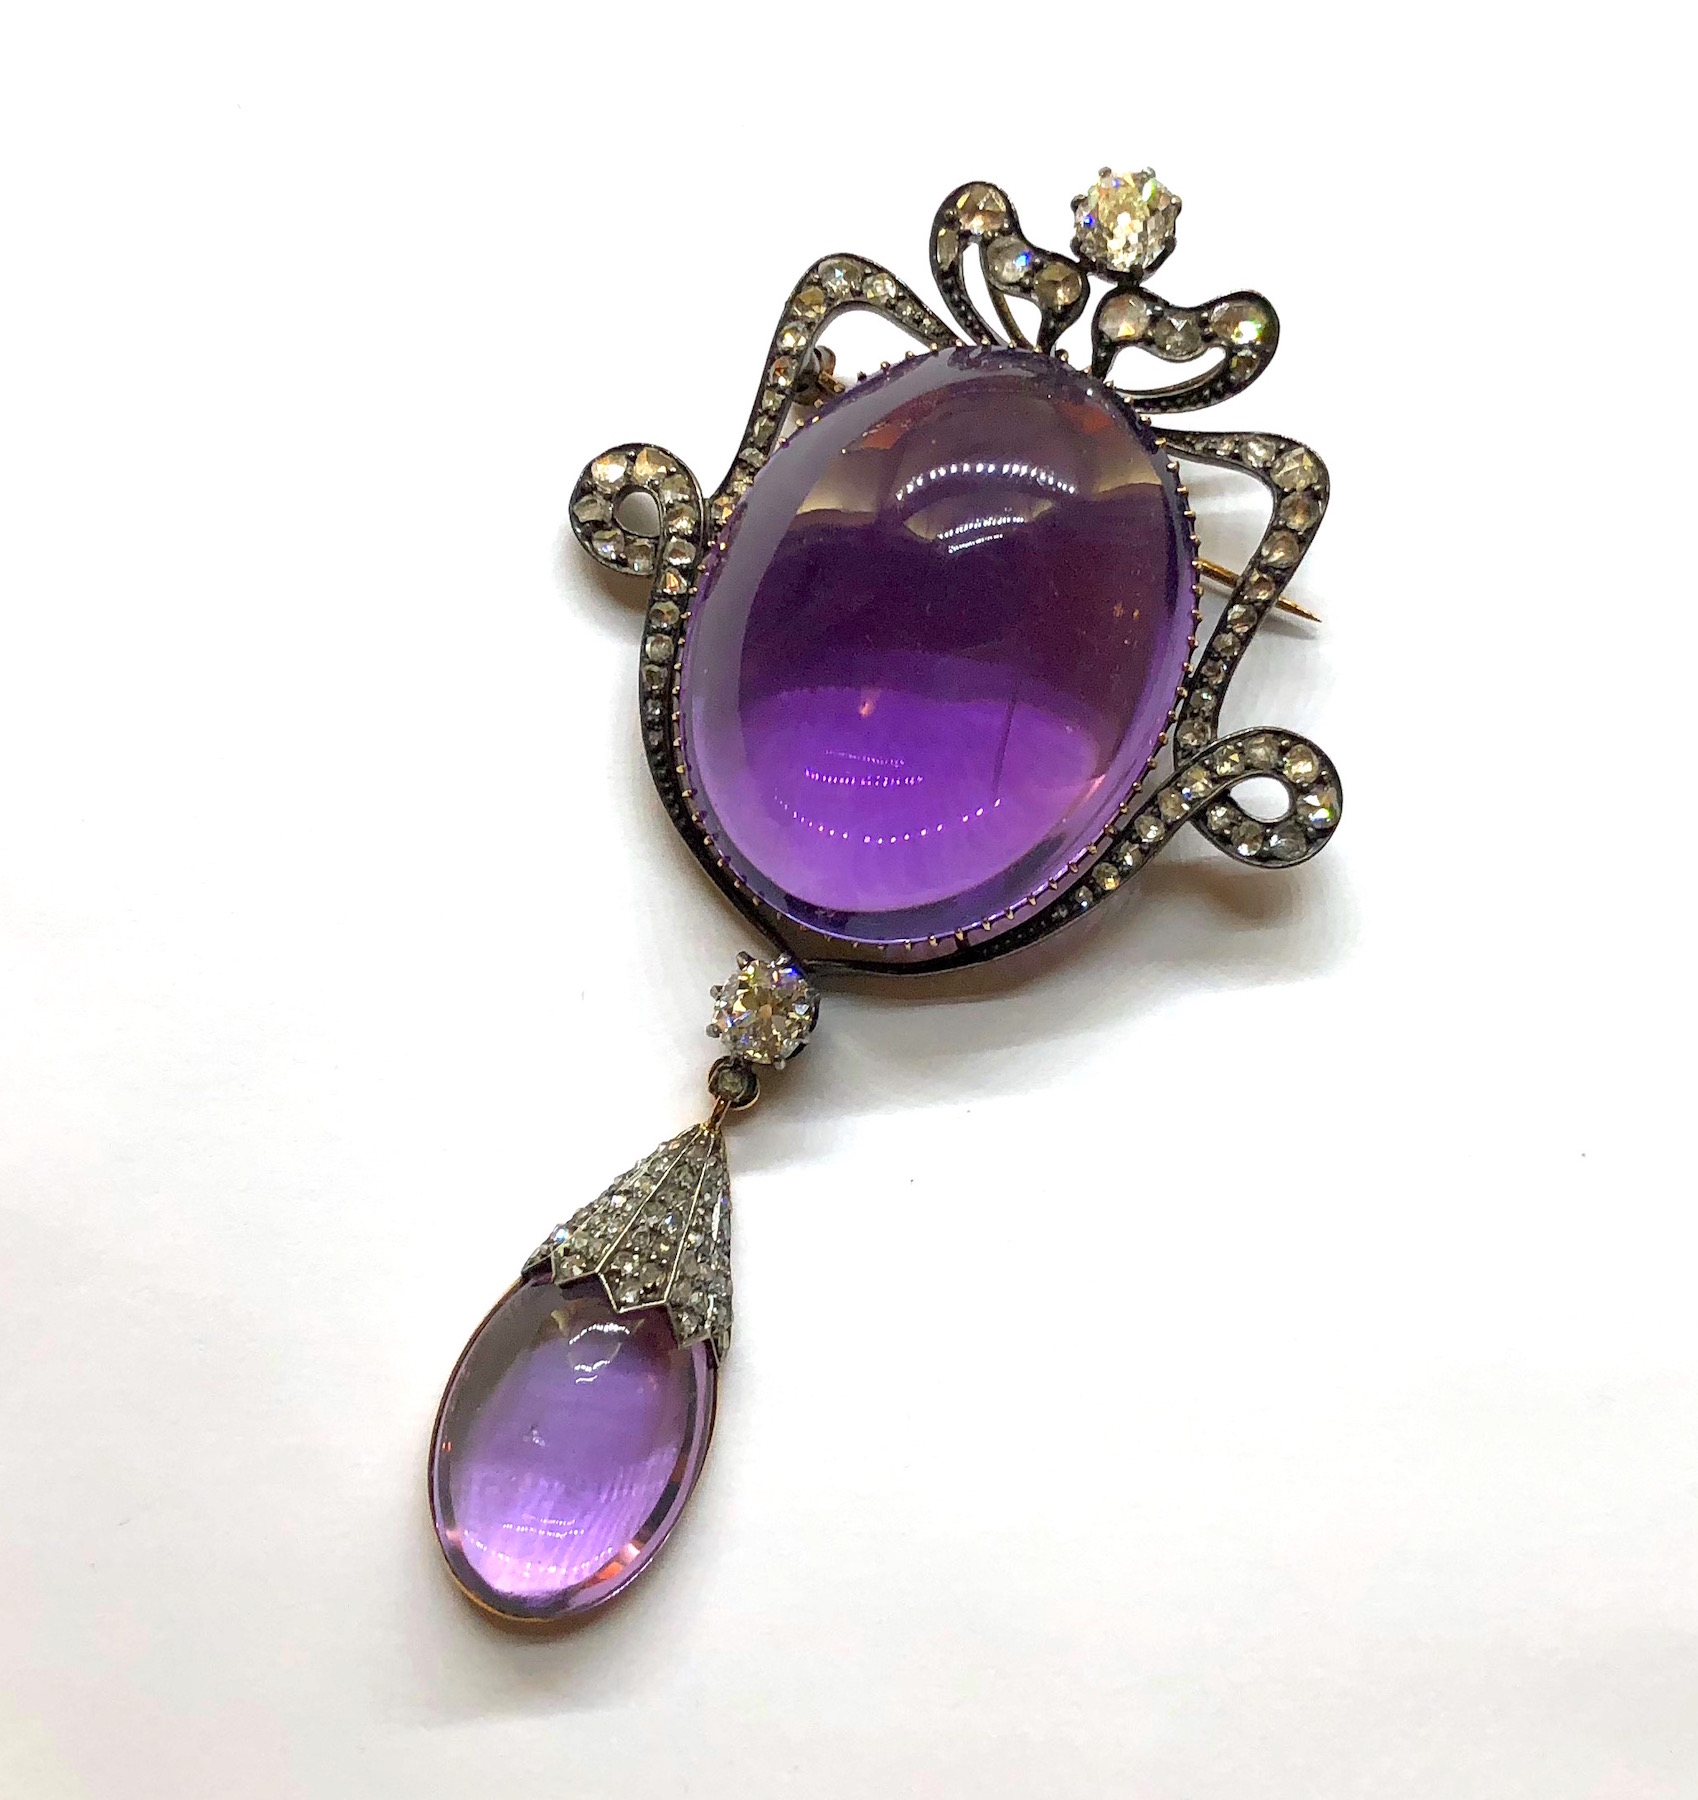 Belle Epoque large cabochon Amethyst pendant brooch (approx. 100+ carats TW) set with old mine cut diamonds and 2 fine old round cut diamonds (approx. 3 carats TW) all in a silver top gold mounting, c. 1895